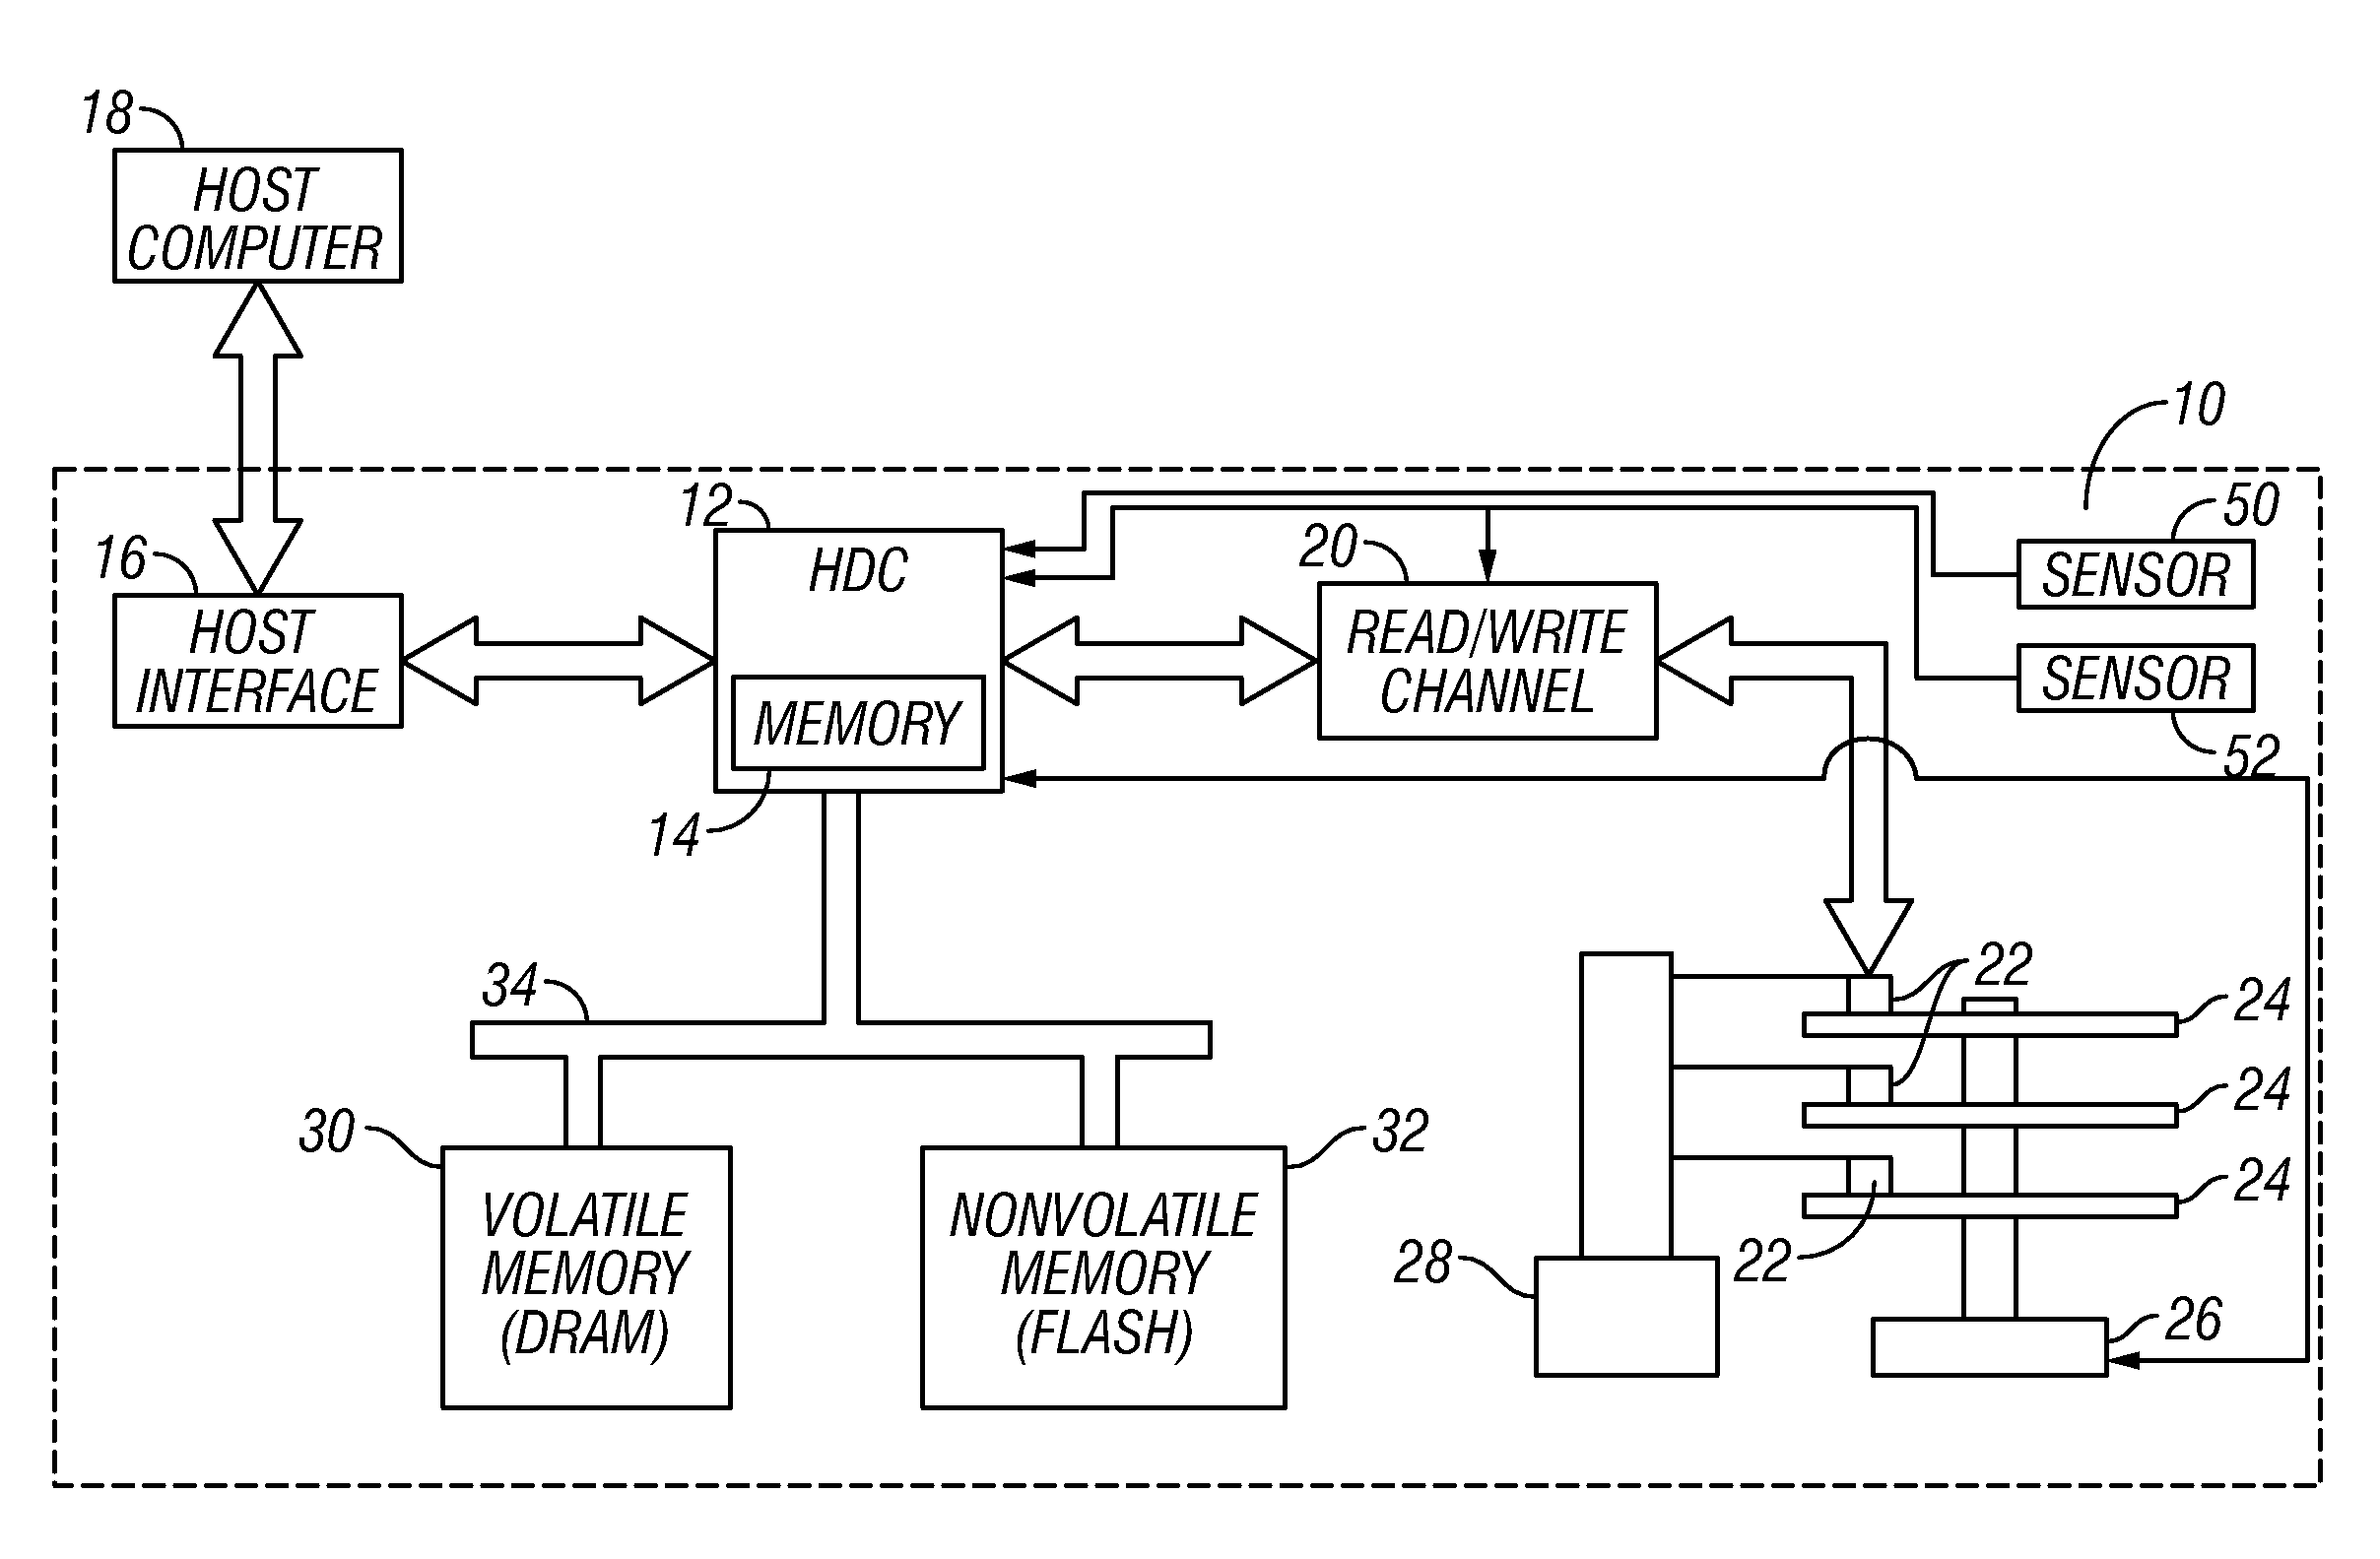 Disk drive with nonvolatile memory for storage of failure-related data